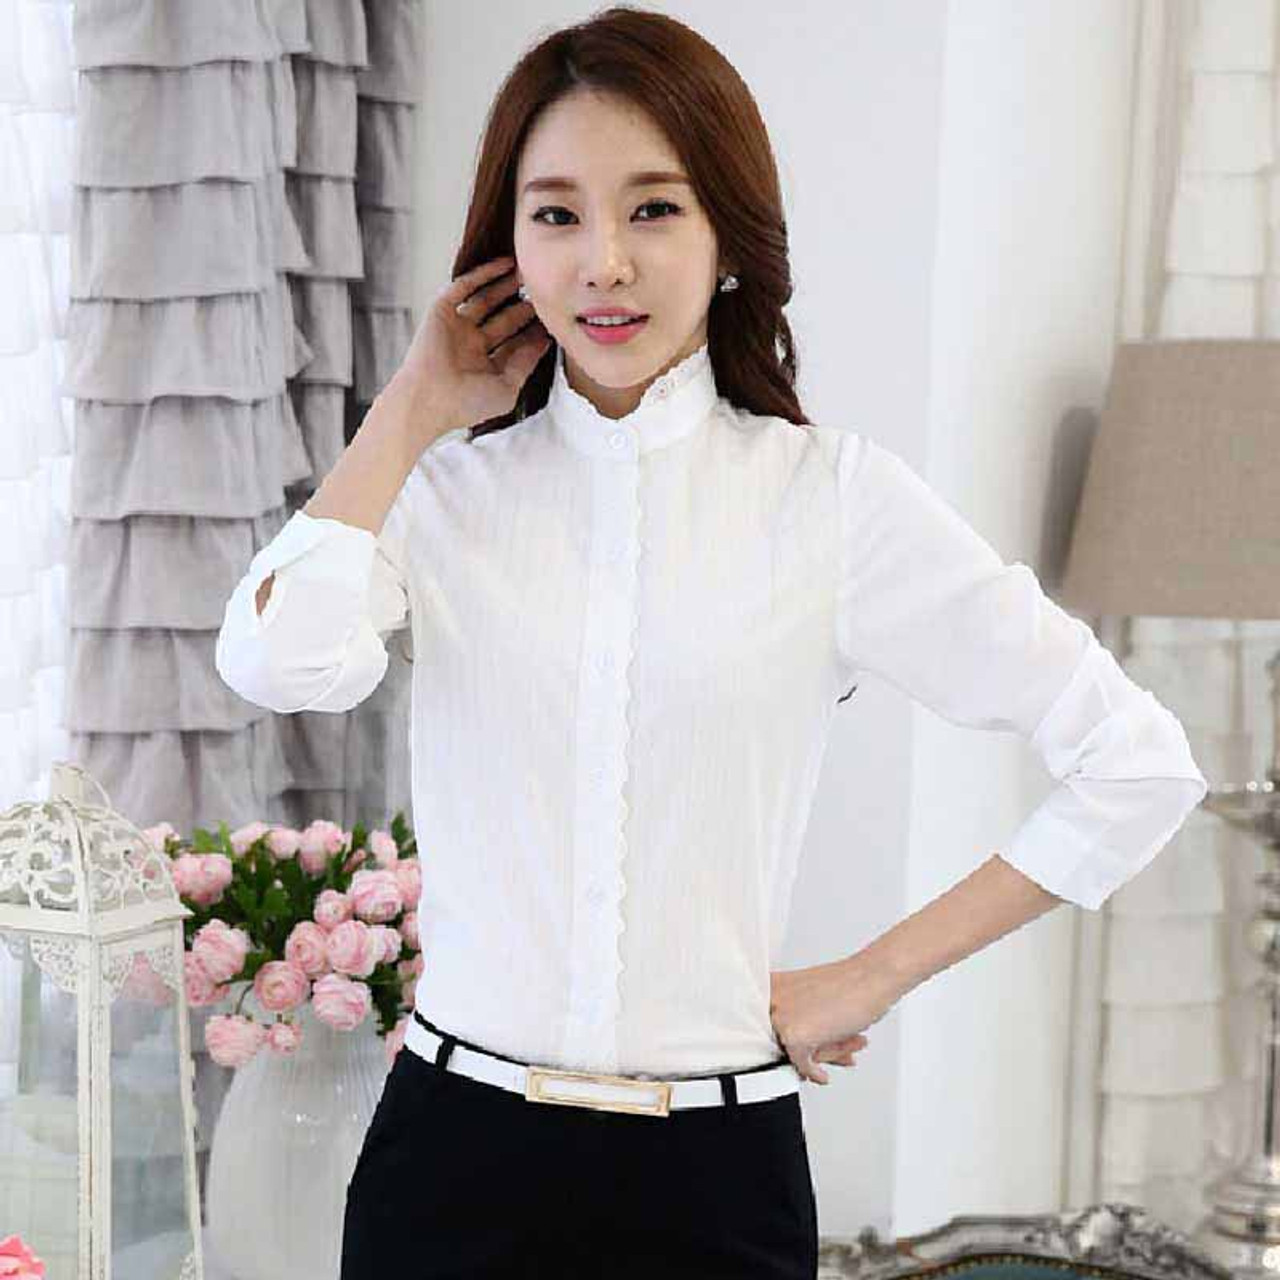 White embroidery lace long sleeve cotton shirt | Womens tops shirts ...